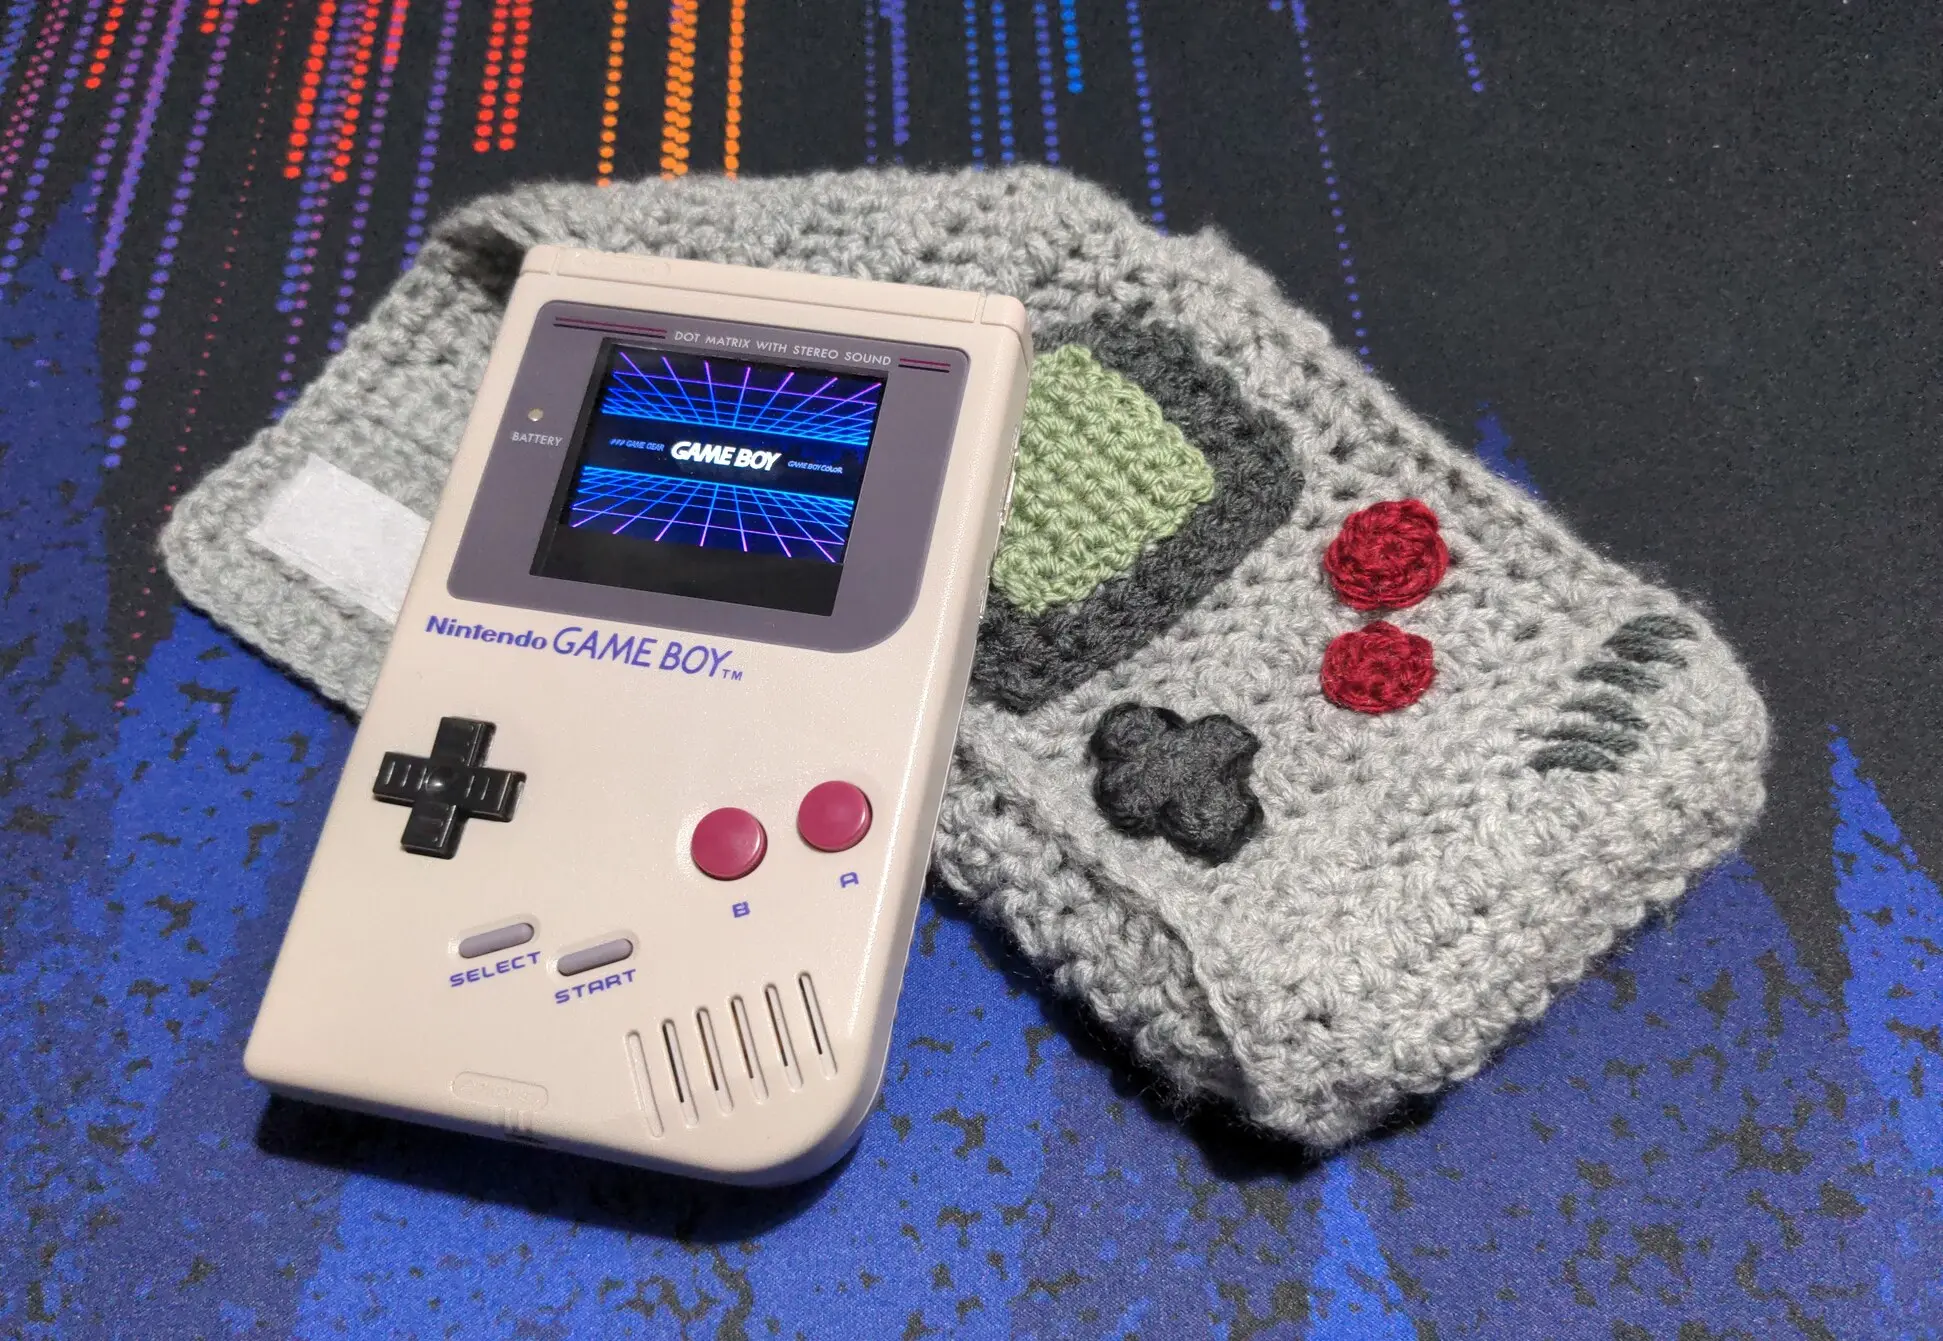 PiBoy: Modded Retro Gameboy (DMG-01) Image of a Raspberry Pi modified DMG-01 Gameboy resting on a crocheted pouch